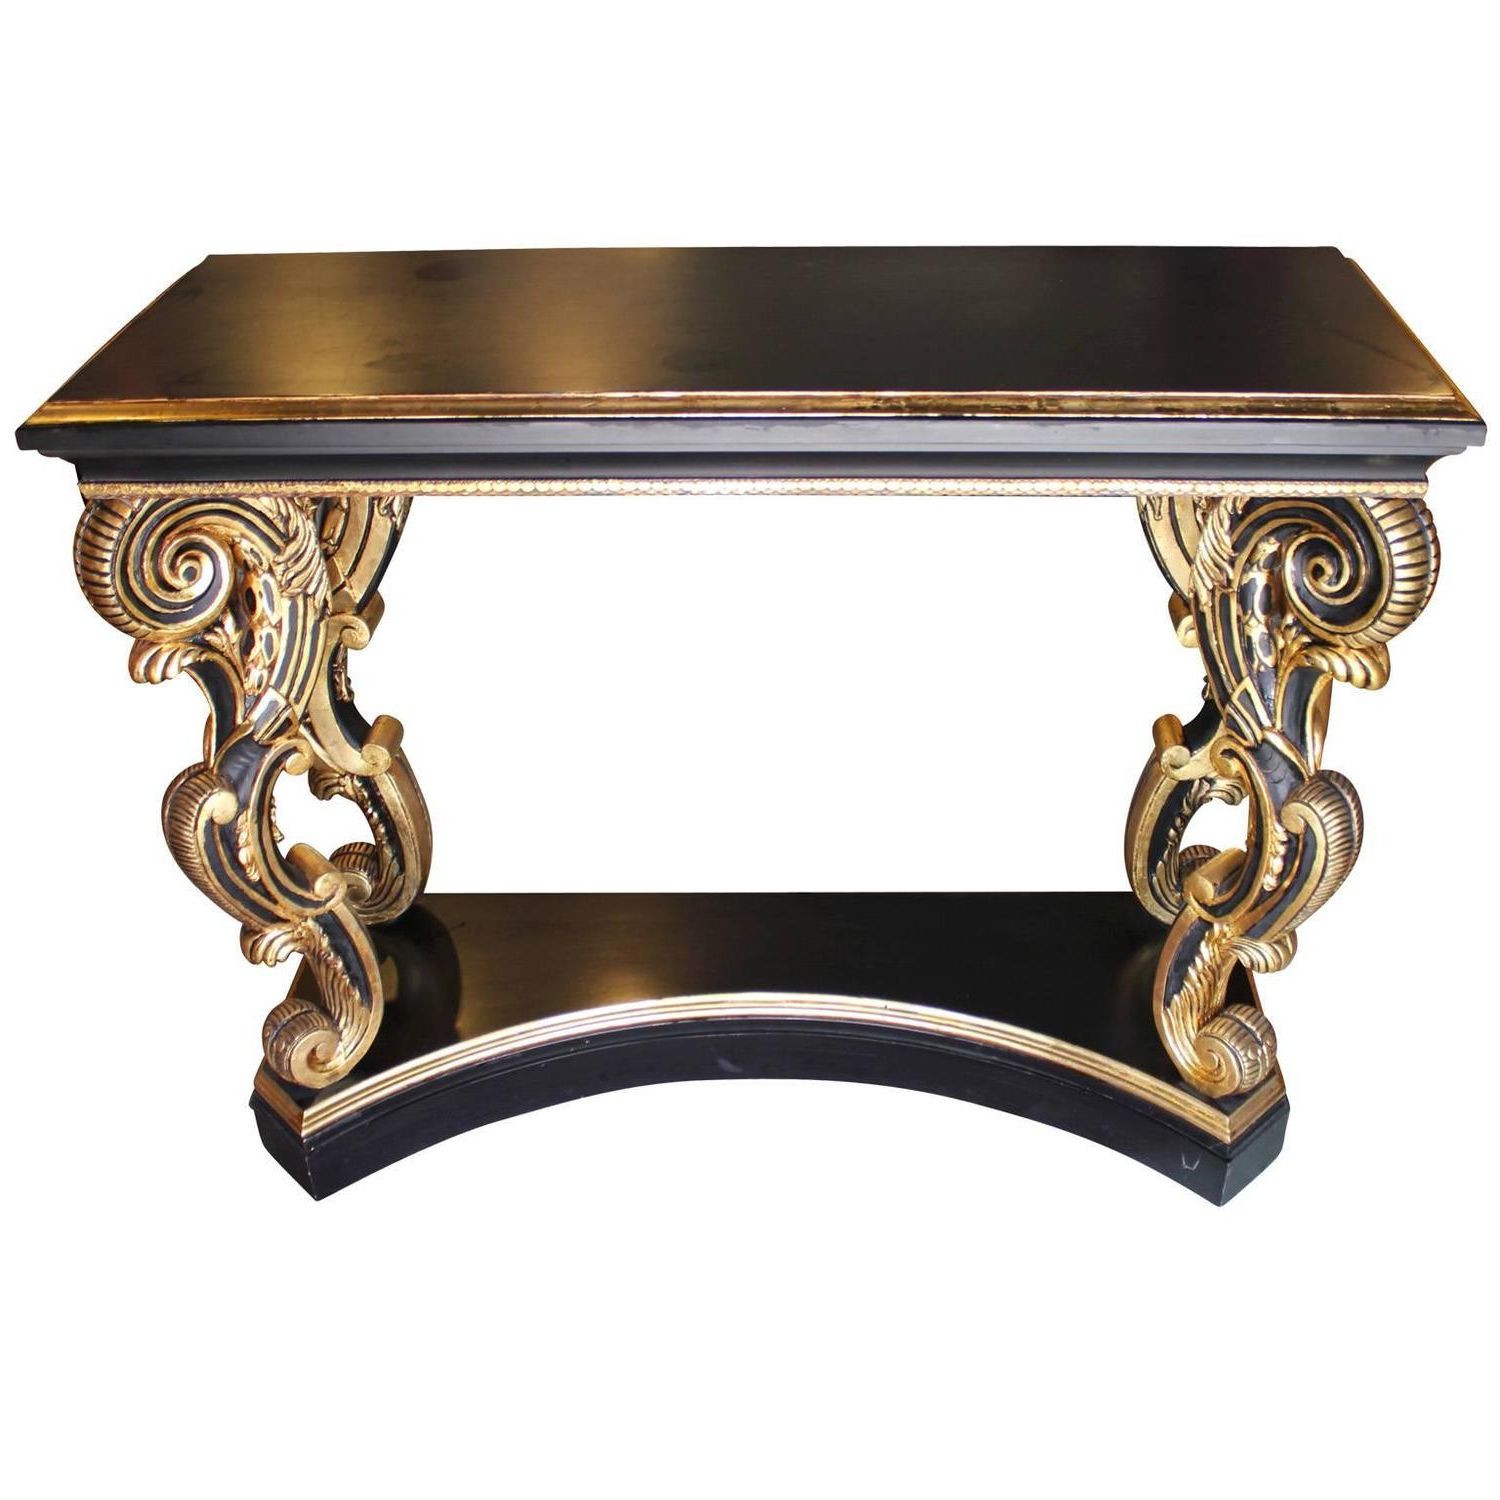 Carved Gold And Black Console Or Entry Table For Sale At With Regard To Best And Newest Antique Blue Gold Console Tables (View 7 of 10)